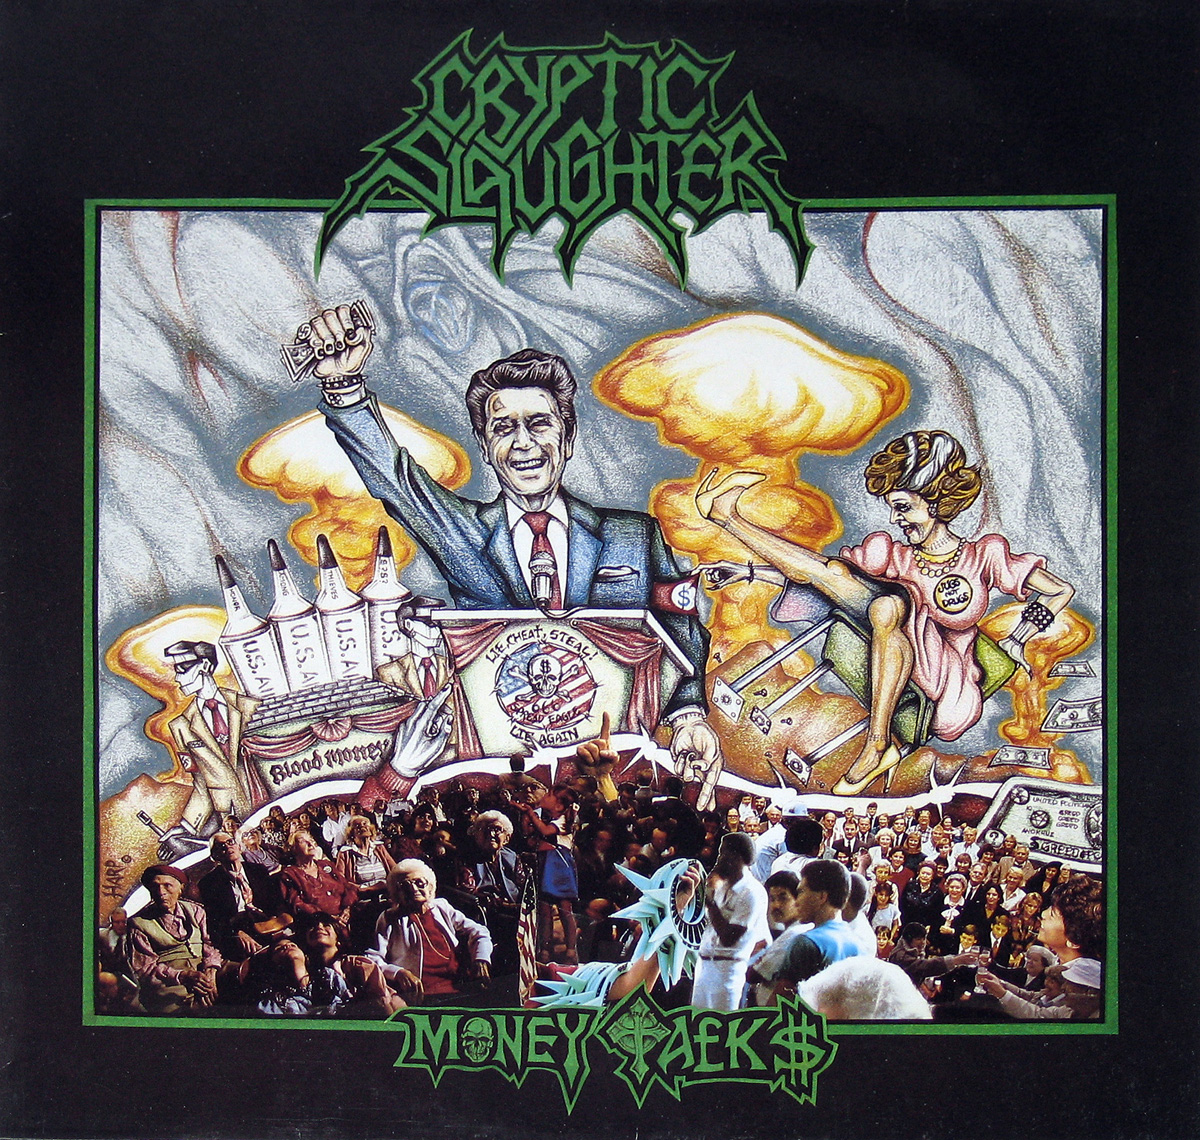 CRYPTIC SLAUGHTER - Money Talks is the second album released by "Cryptic  Slaughter" Hardcore Punk Crossover Thrash Metal LP Vinyl Album Cover  Gallery & Information #vinylrecords